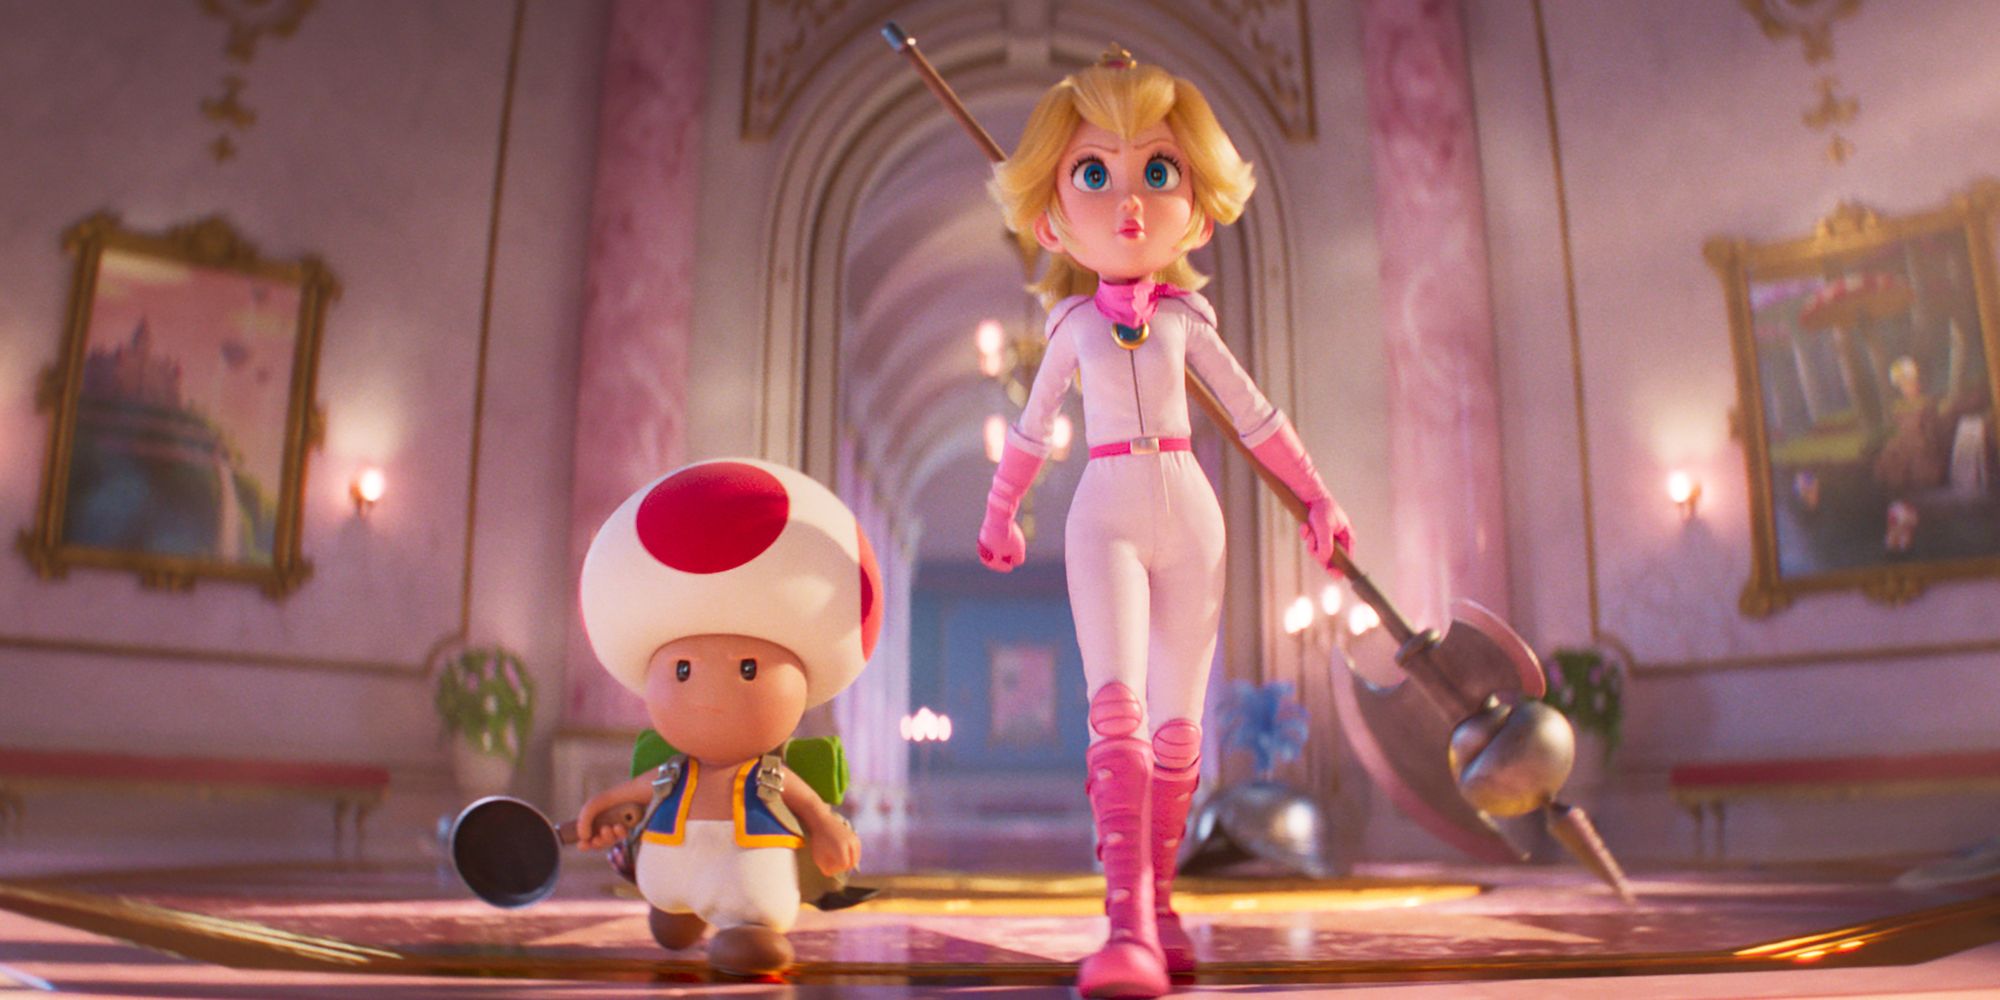 Super Mario Bros. Movie Gives Peach Redemption For Nintendo’s Female Characters